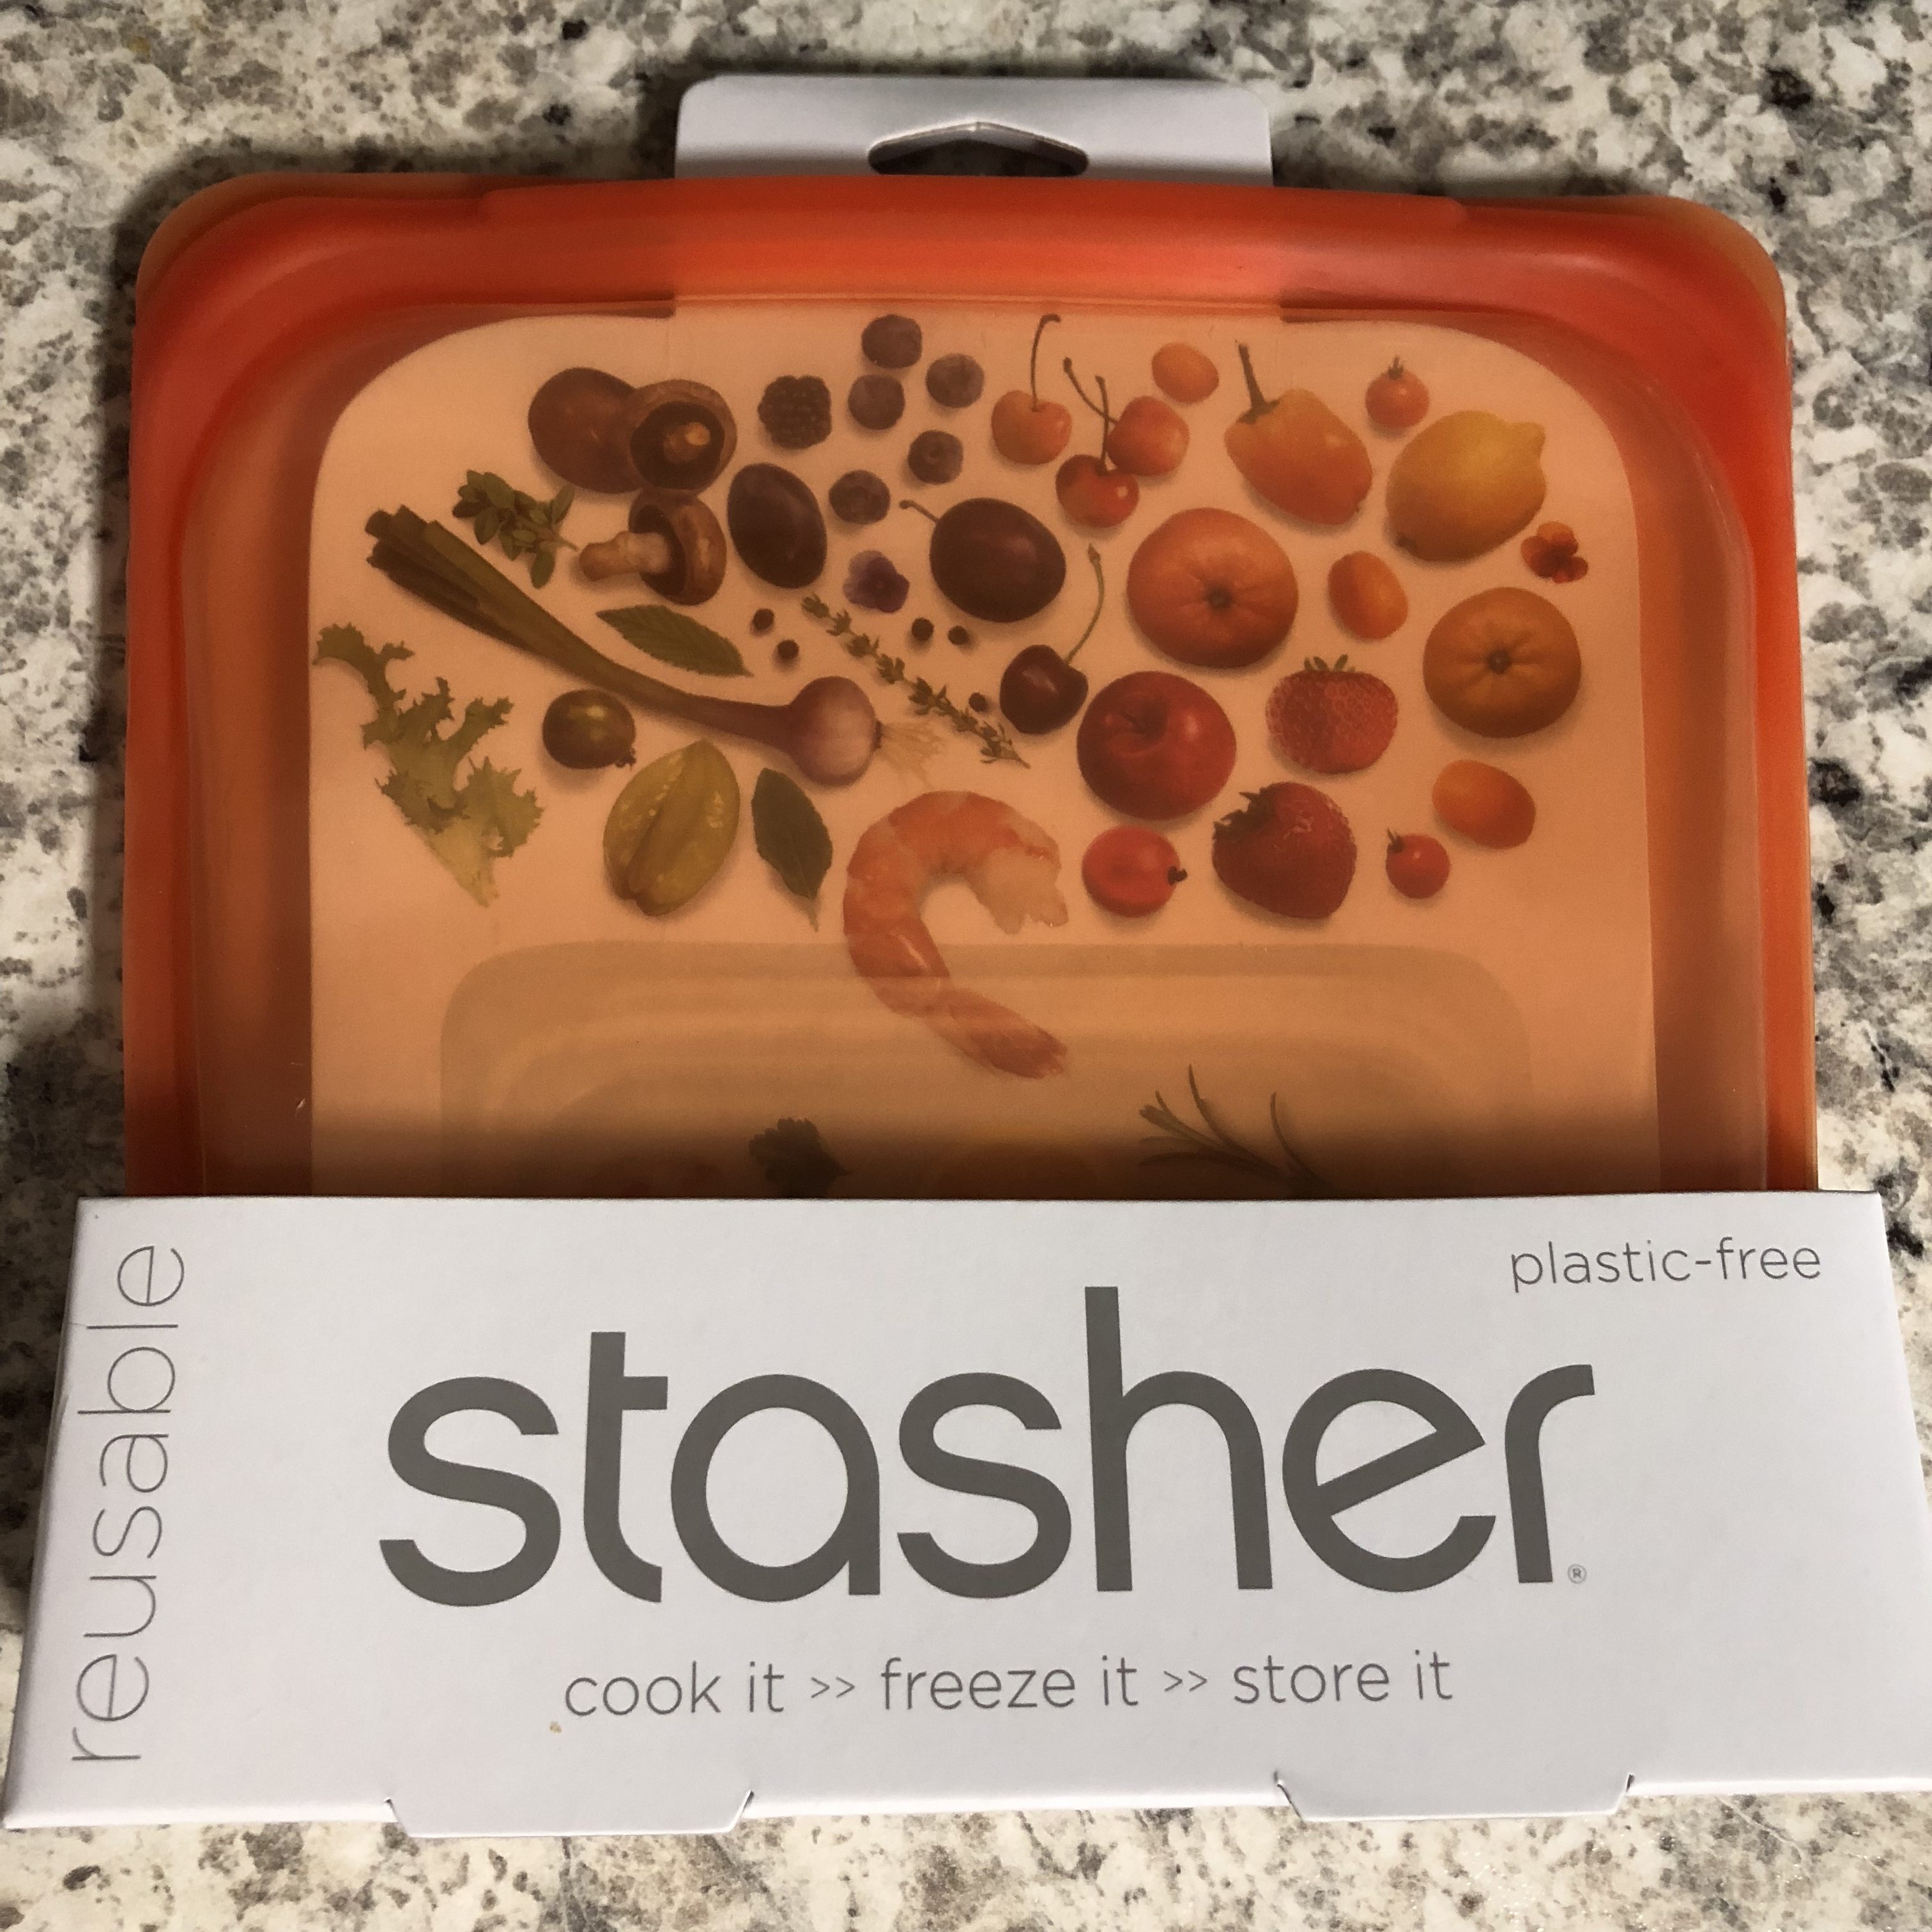 Stasher reusable silicone bag - My Life: A Work in Progress